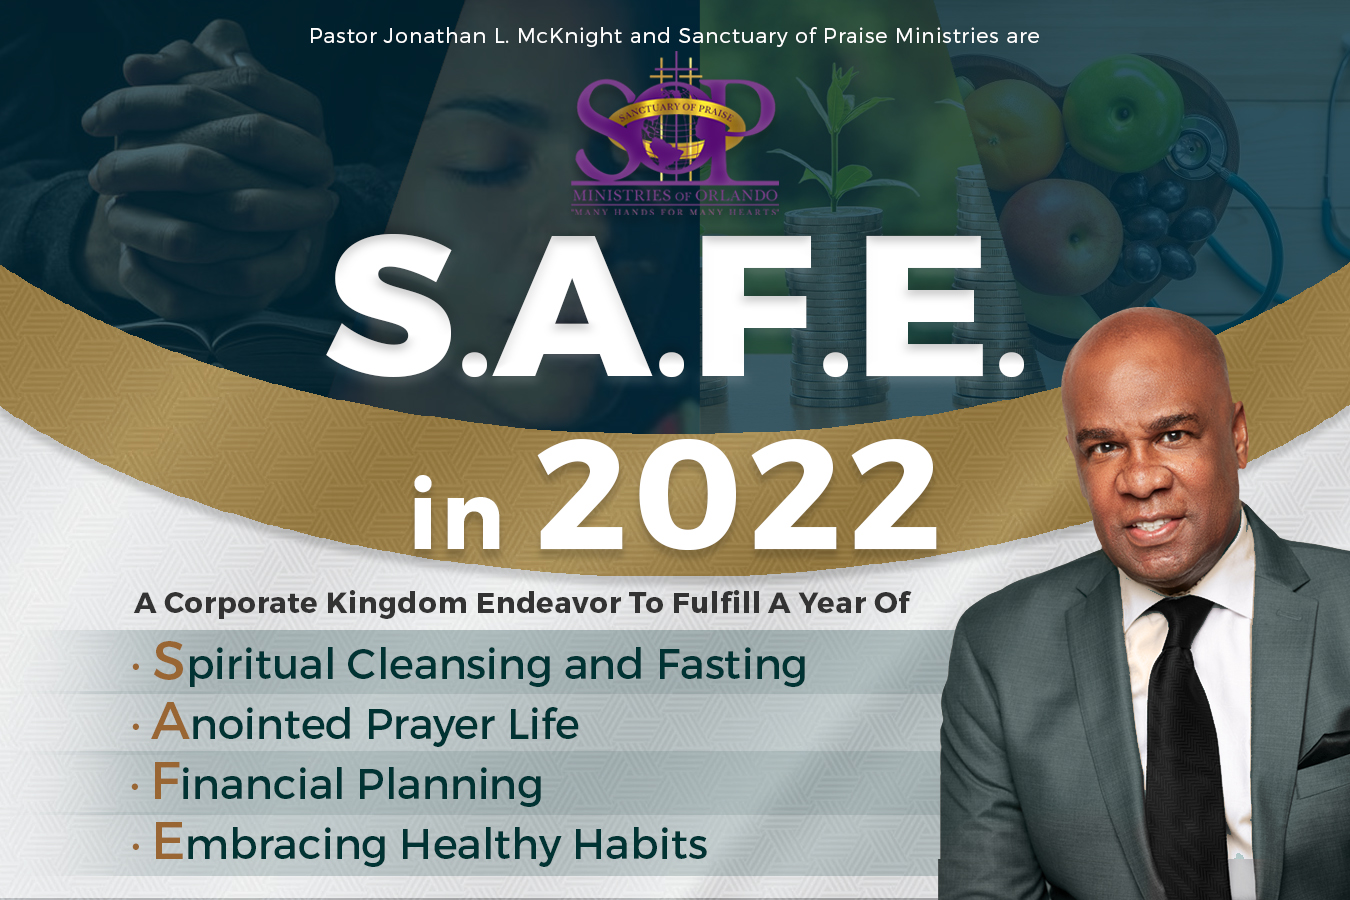 SAFE in 2022 ad